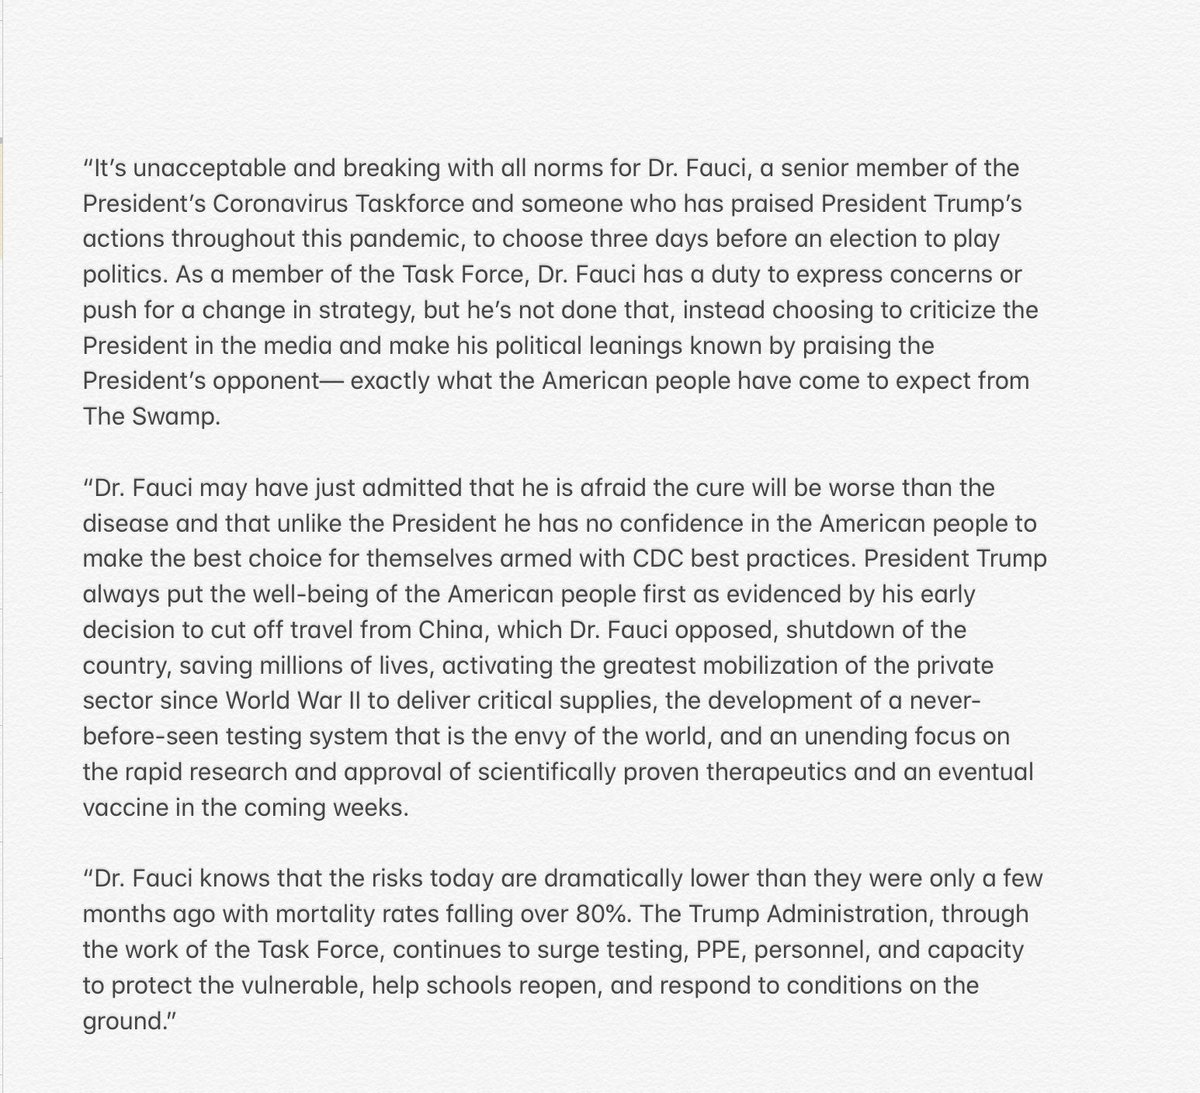 "Dr. Fauci has a duty to express concerns or push for a change in strategy, but he’s not done that, instead choosing to criticize the President in the media and make his political leanings known by praising the President’s opponent,"  @JuddPDeere45 in statement.